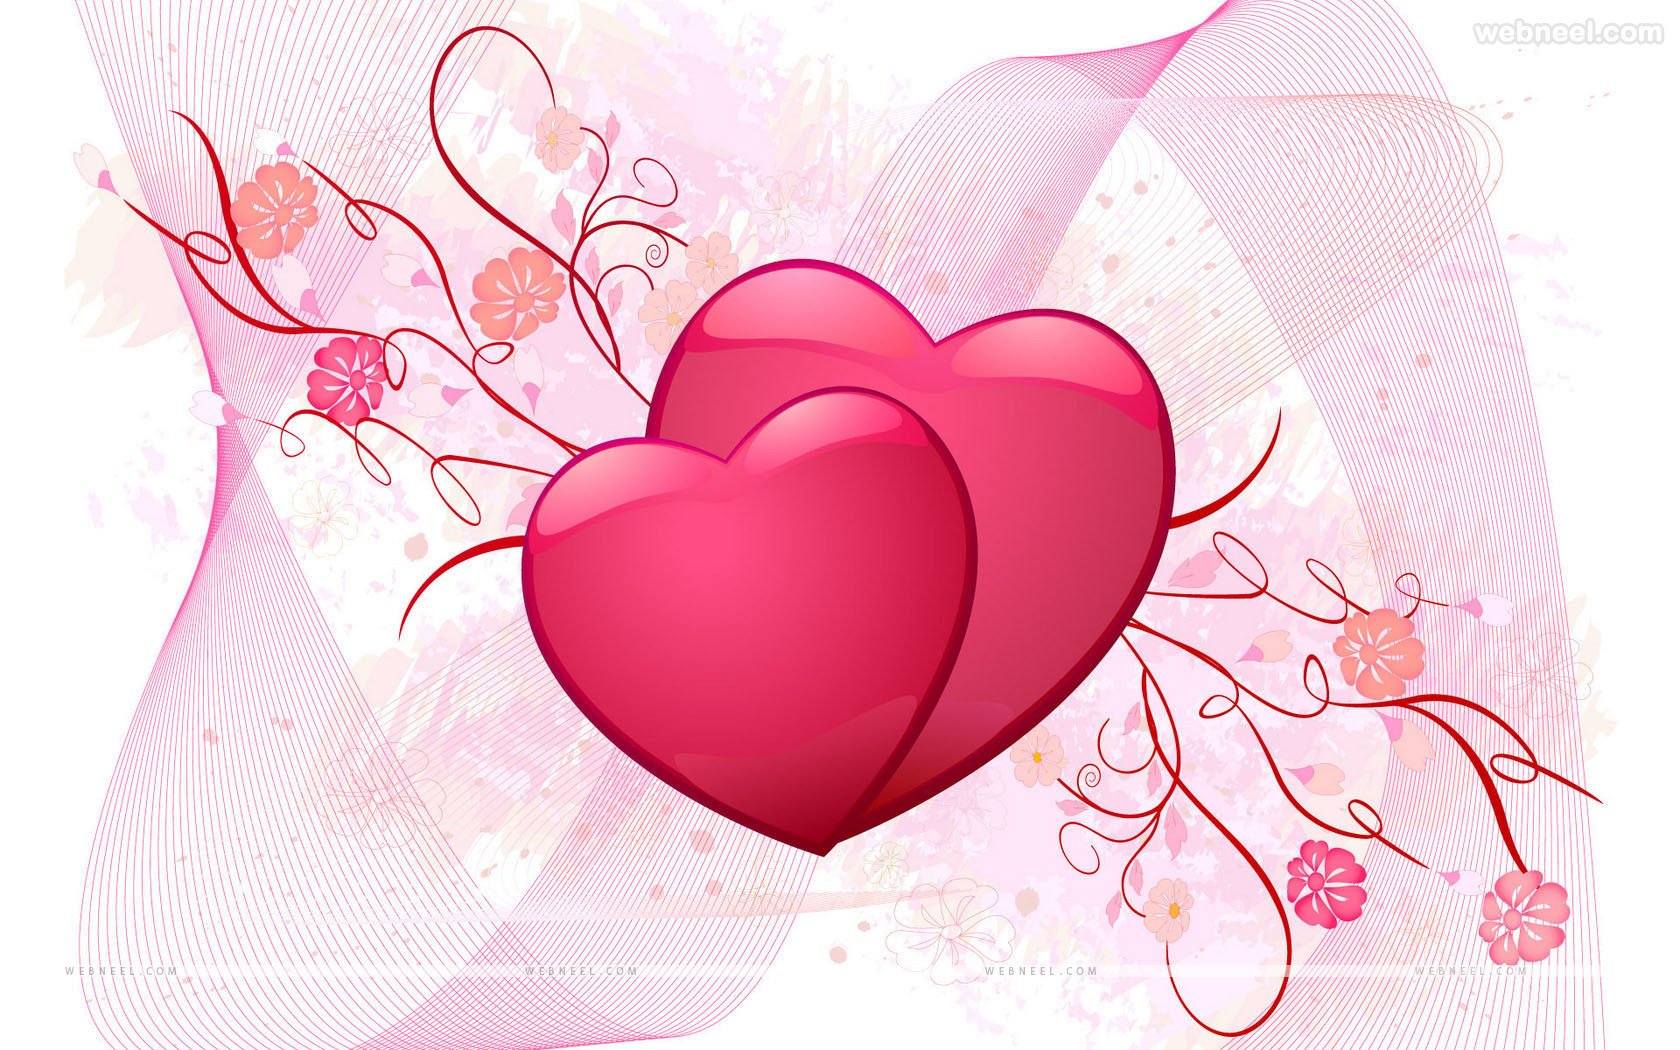 Happy Valentines Day Wallpaper 30 Beautiful Valentines Day Wallpapers for Your Desktop